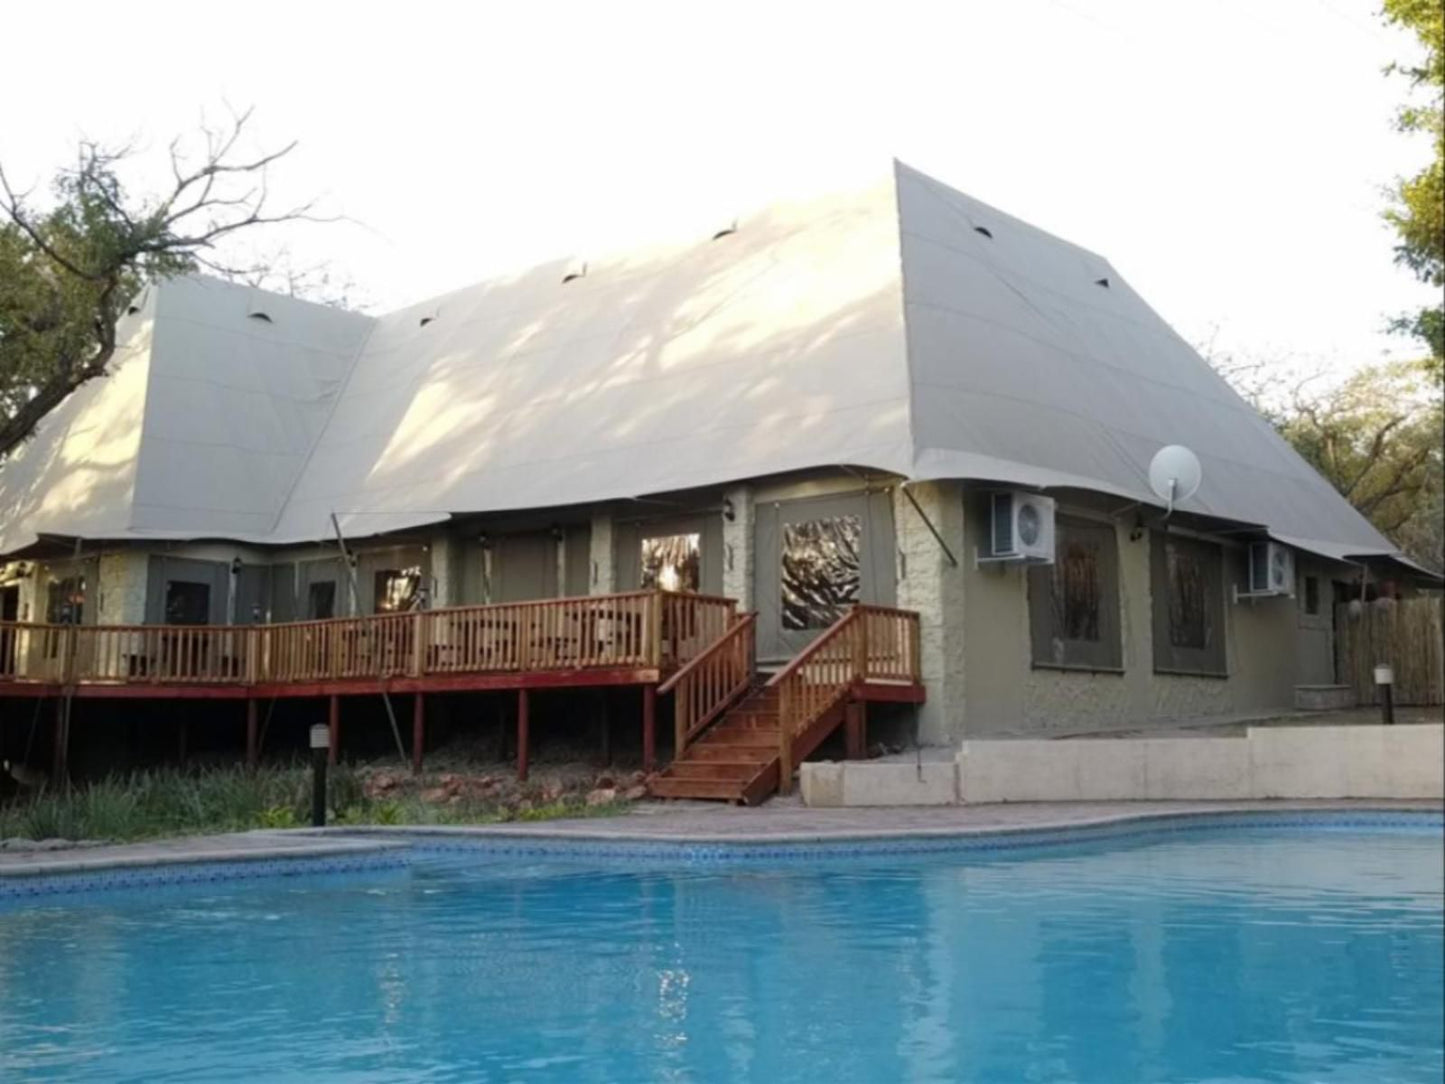 Kruger Adventure Lodge Hazyview Mpumalanga South Africa Building, Architecture, House, Swimming Pool